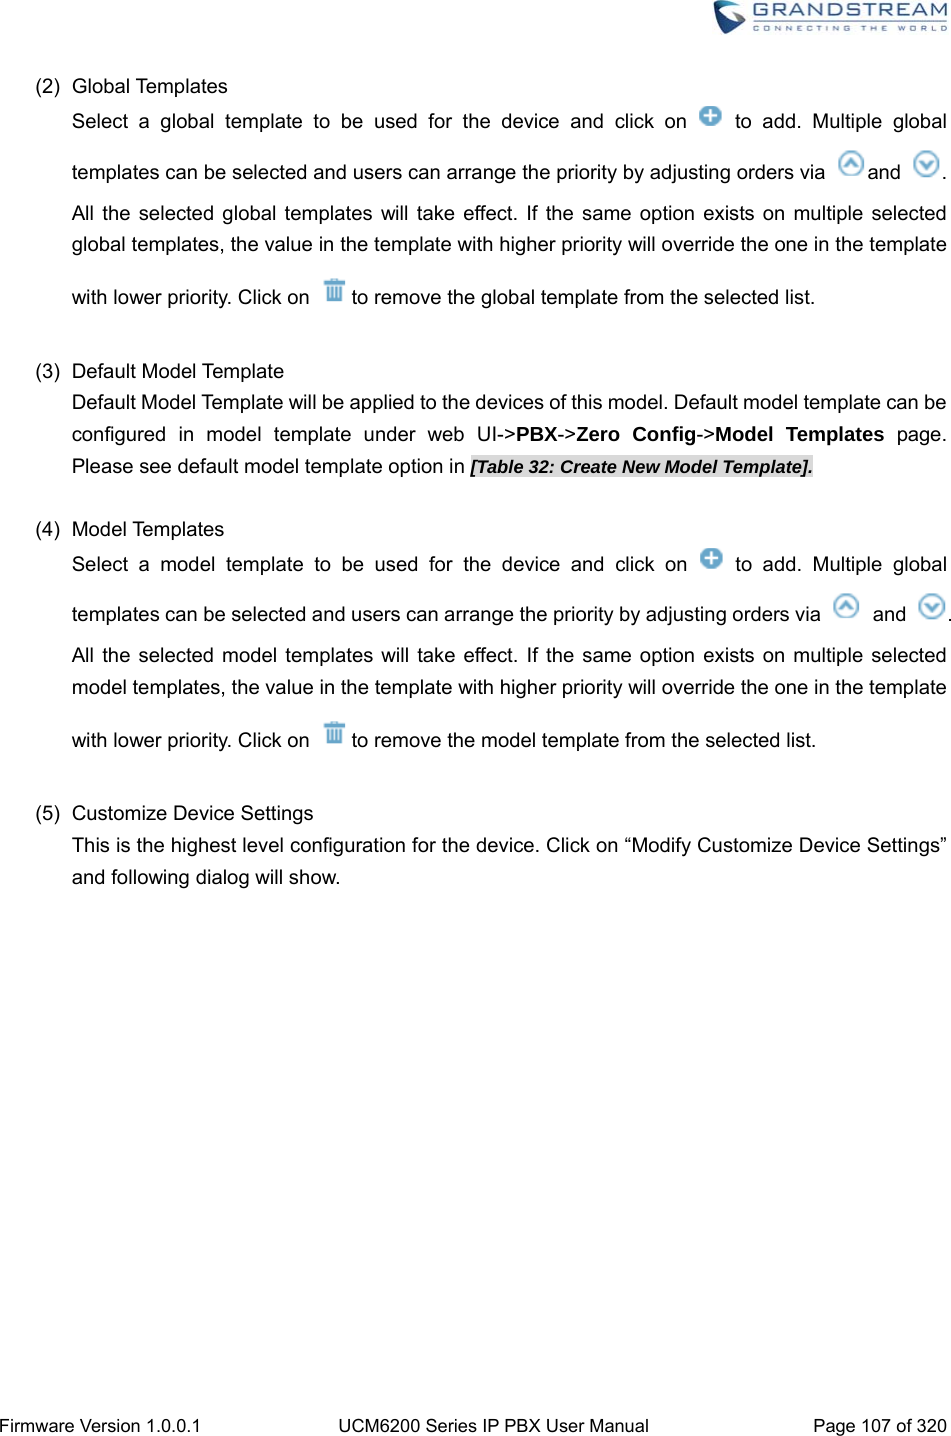  Firmware Version 1.0.0.1  UCM6200 Series IP PBX User Manual  Page 107 of 320 (2) Global Templates Select a global template to be used for the device and click on   to add. Multiple global templates can be selected and users can arrange the priority by adjusting orders via  and  . All the selected global templates will take effect. If the same option exists on multiple selected global templates, the value in the template with higher priority will override the one in the template with lower priority. Click on  to remove the global template from the selected list.  (3) Default Model Template Default Model Template will be applied to the devices of this model. Default model template can be configured in model template under web UI-&gt;PBX-&gt;Zero Config-&gt;Model Templates page. Please see default model template option in [Table 32: Create New Model Template].    (4) Model Templates Select a model template to be used for the device and click on   to add. Multiple global templates can be selected and users can arrange the priority by adjusting orders via   and  . All the selected model templates will take effect. If the same option exists on multiple selected model templates, the value in the template with higher priority will override the one in the template with lower priority. Click on  to remove the model template from the selected list.  (5) Customize Device Settings This is the highest level configuration for the device. Click on “Modify Customize Device Settings” and following dialog will show. 